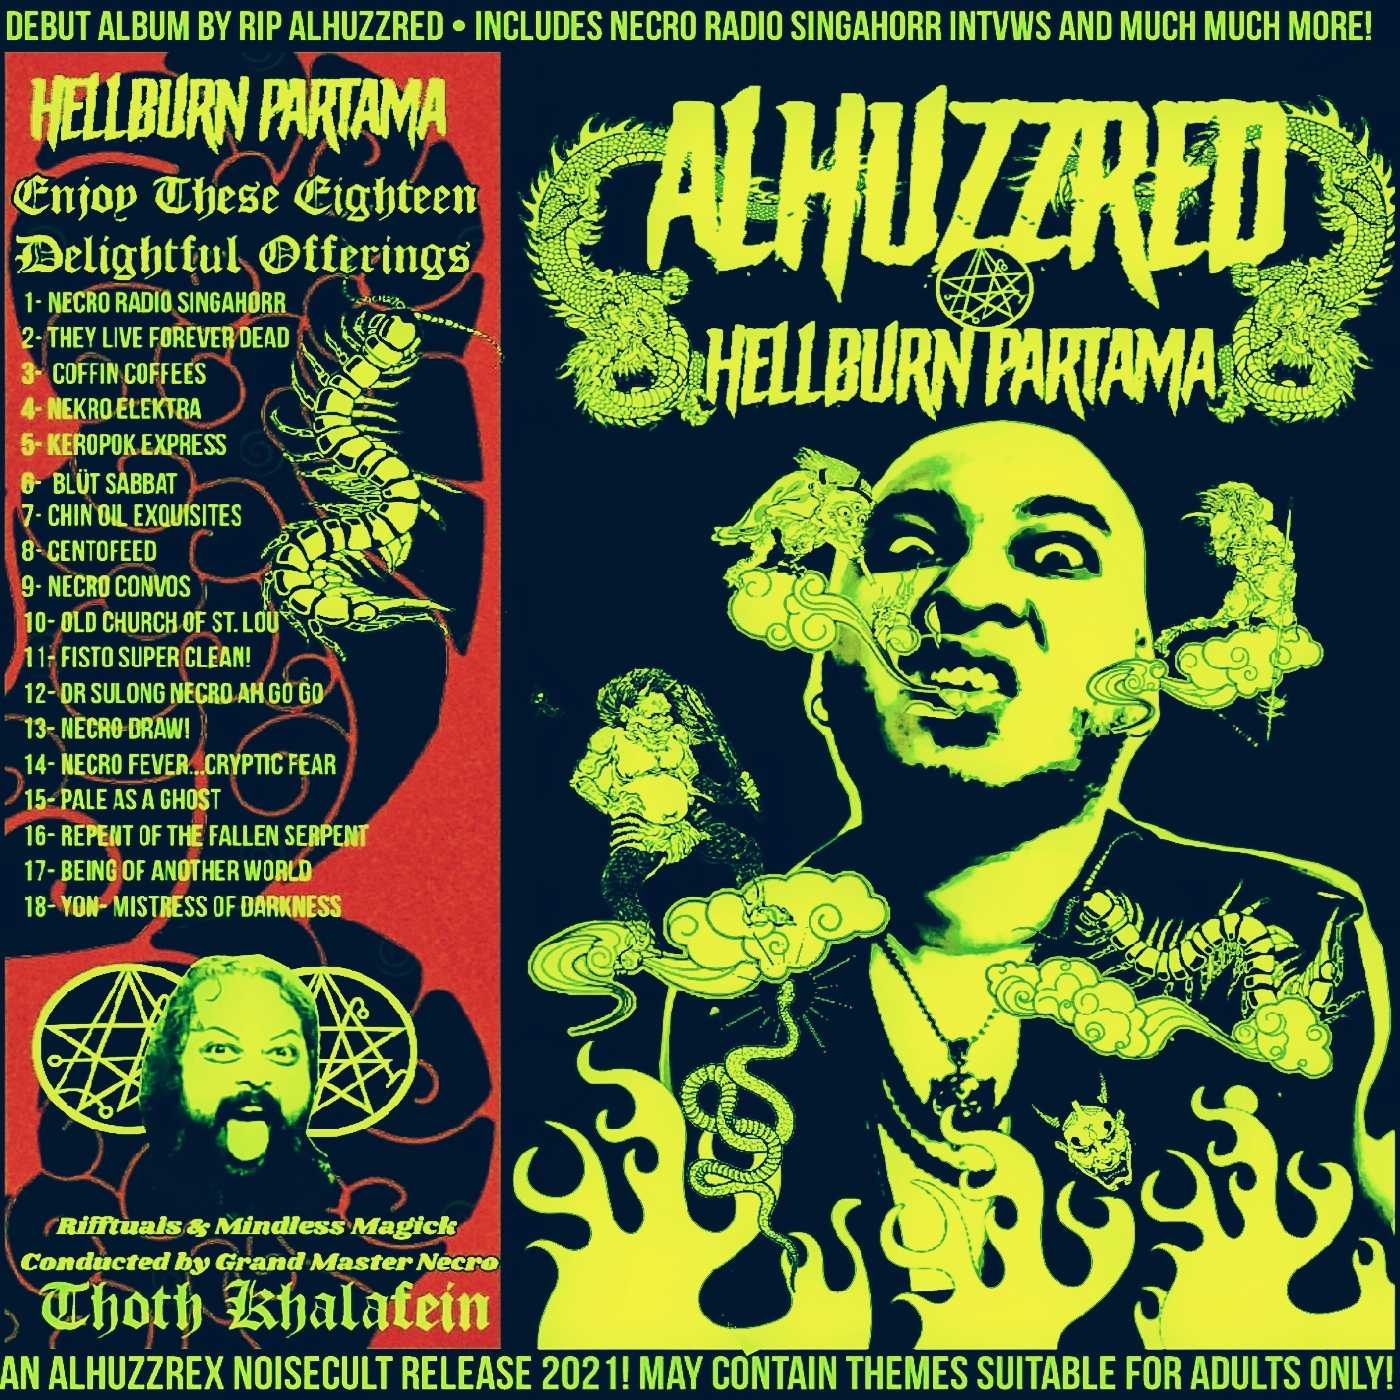 ALHUZZRED from Singapore releases their solo debut album “Hellburn Partama”.